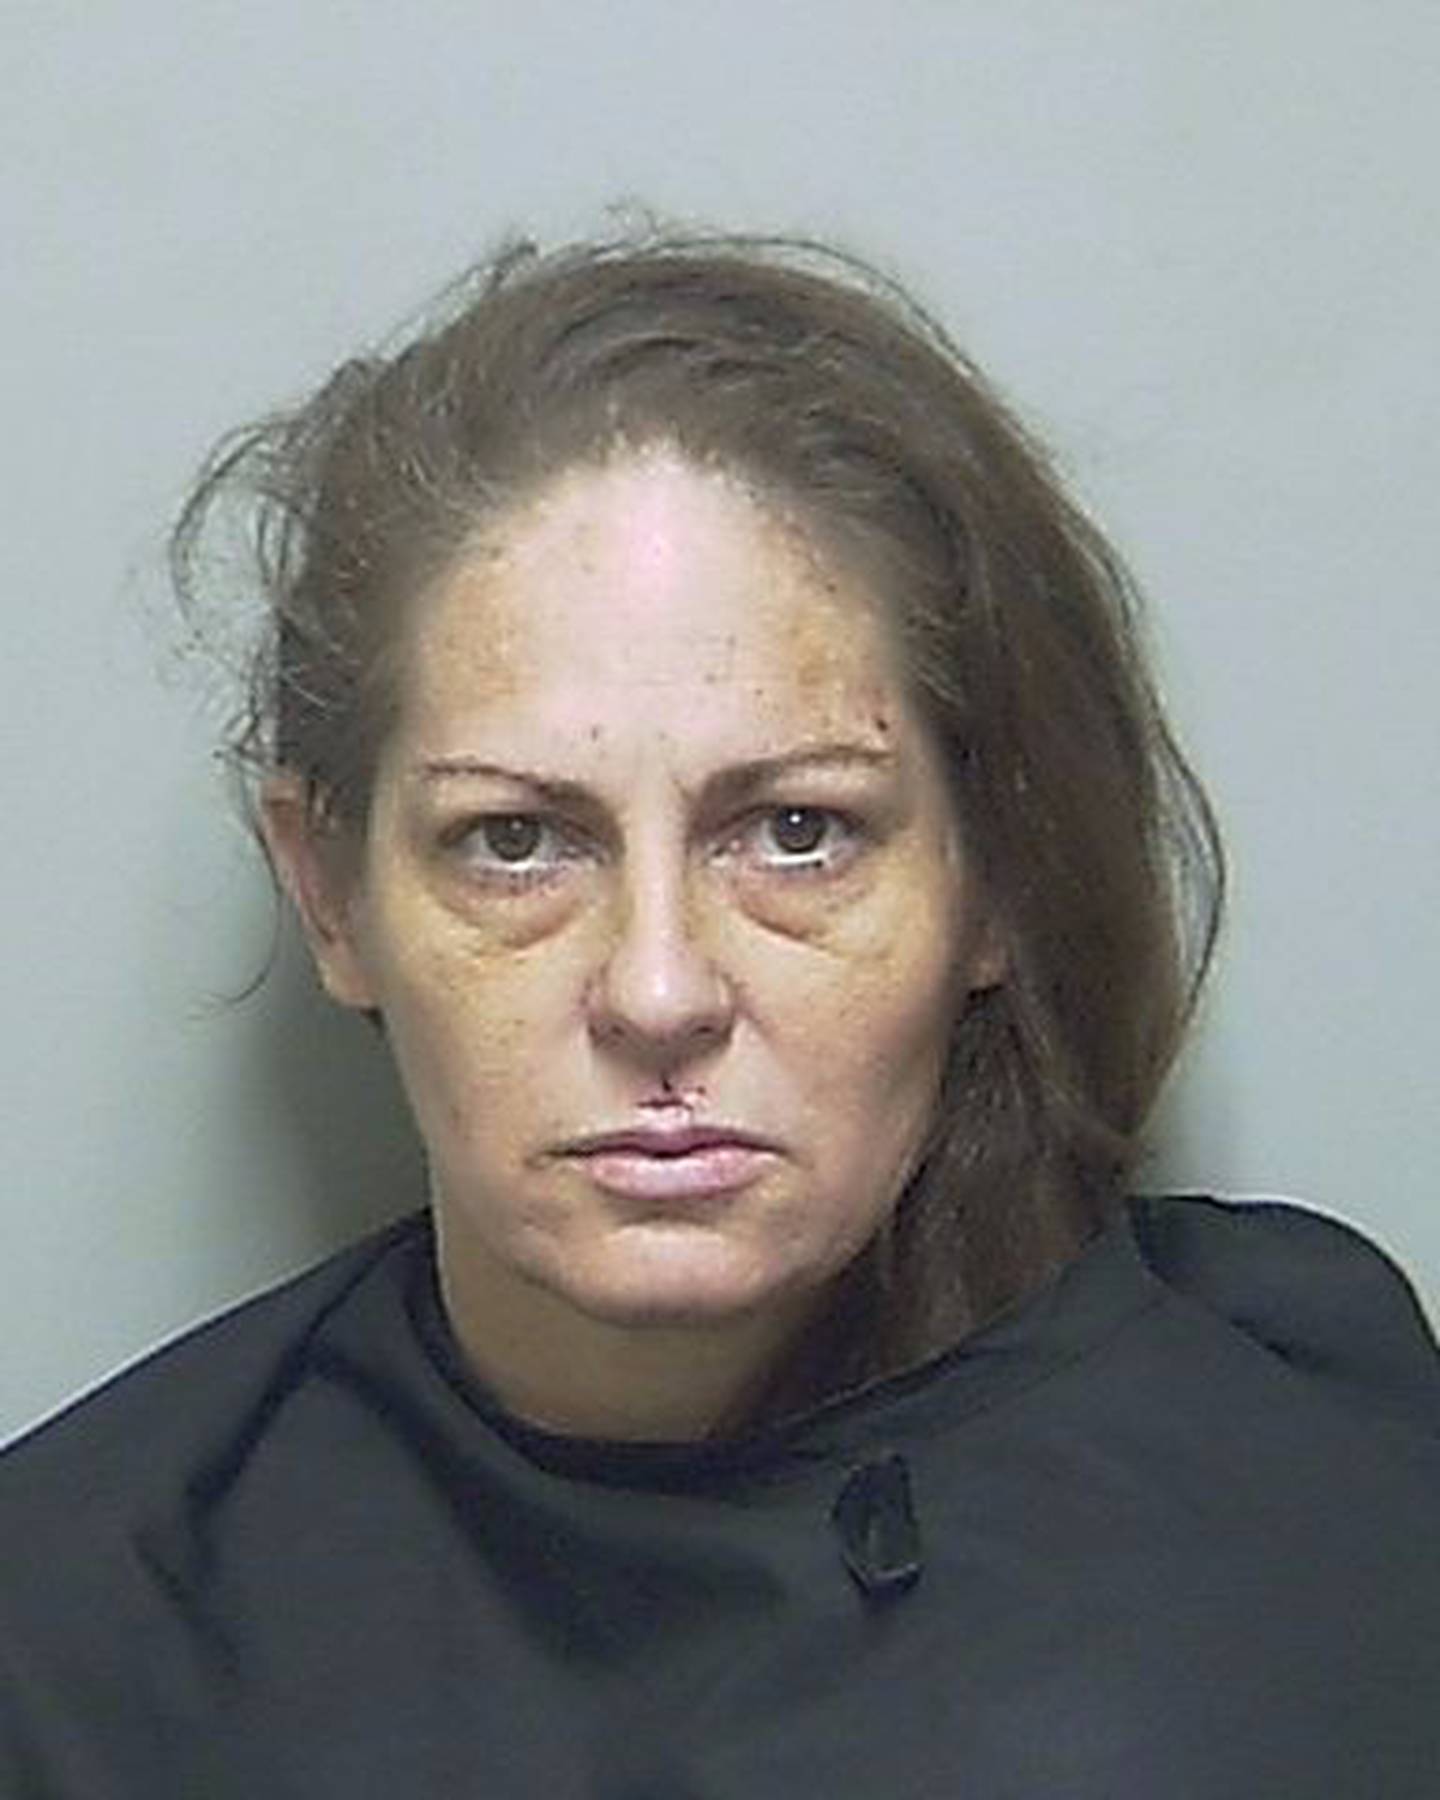 Tracy Wilson was also charged with attempting to smuggle pills into jail after her initial arrest.